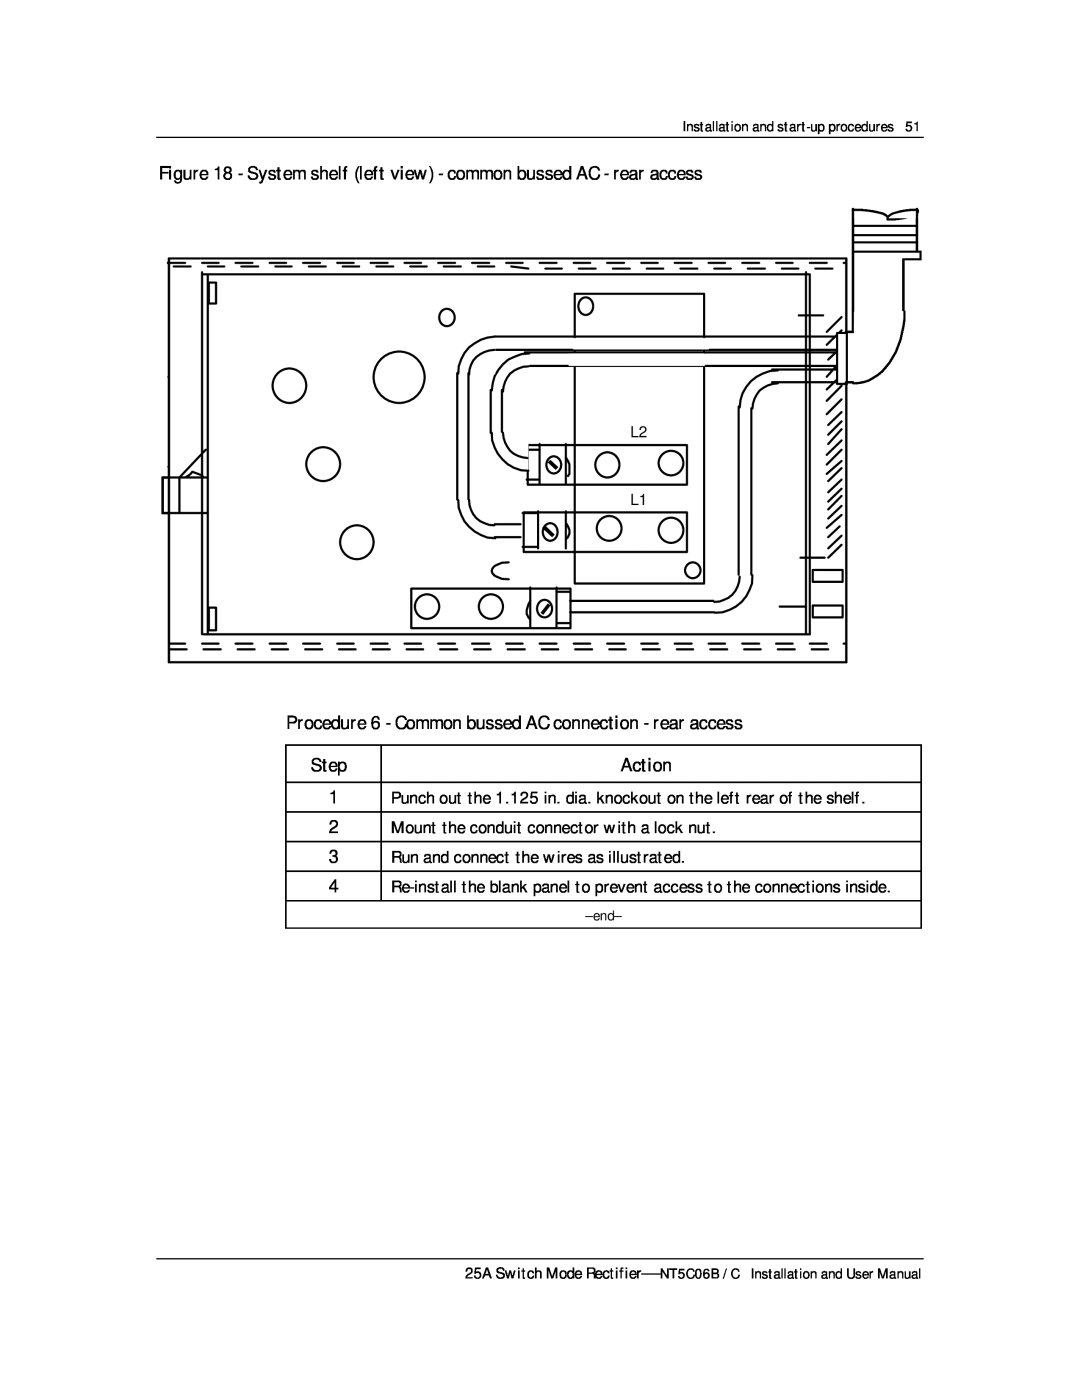 Emerson MPR25, MPR15 Series user manual System shelf left view - common bussed AC - rear access, Step 